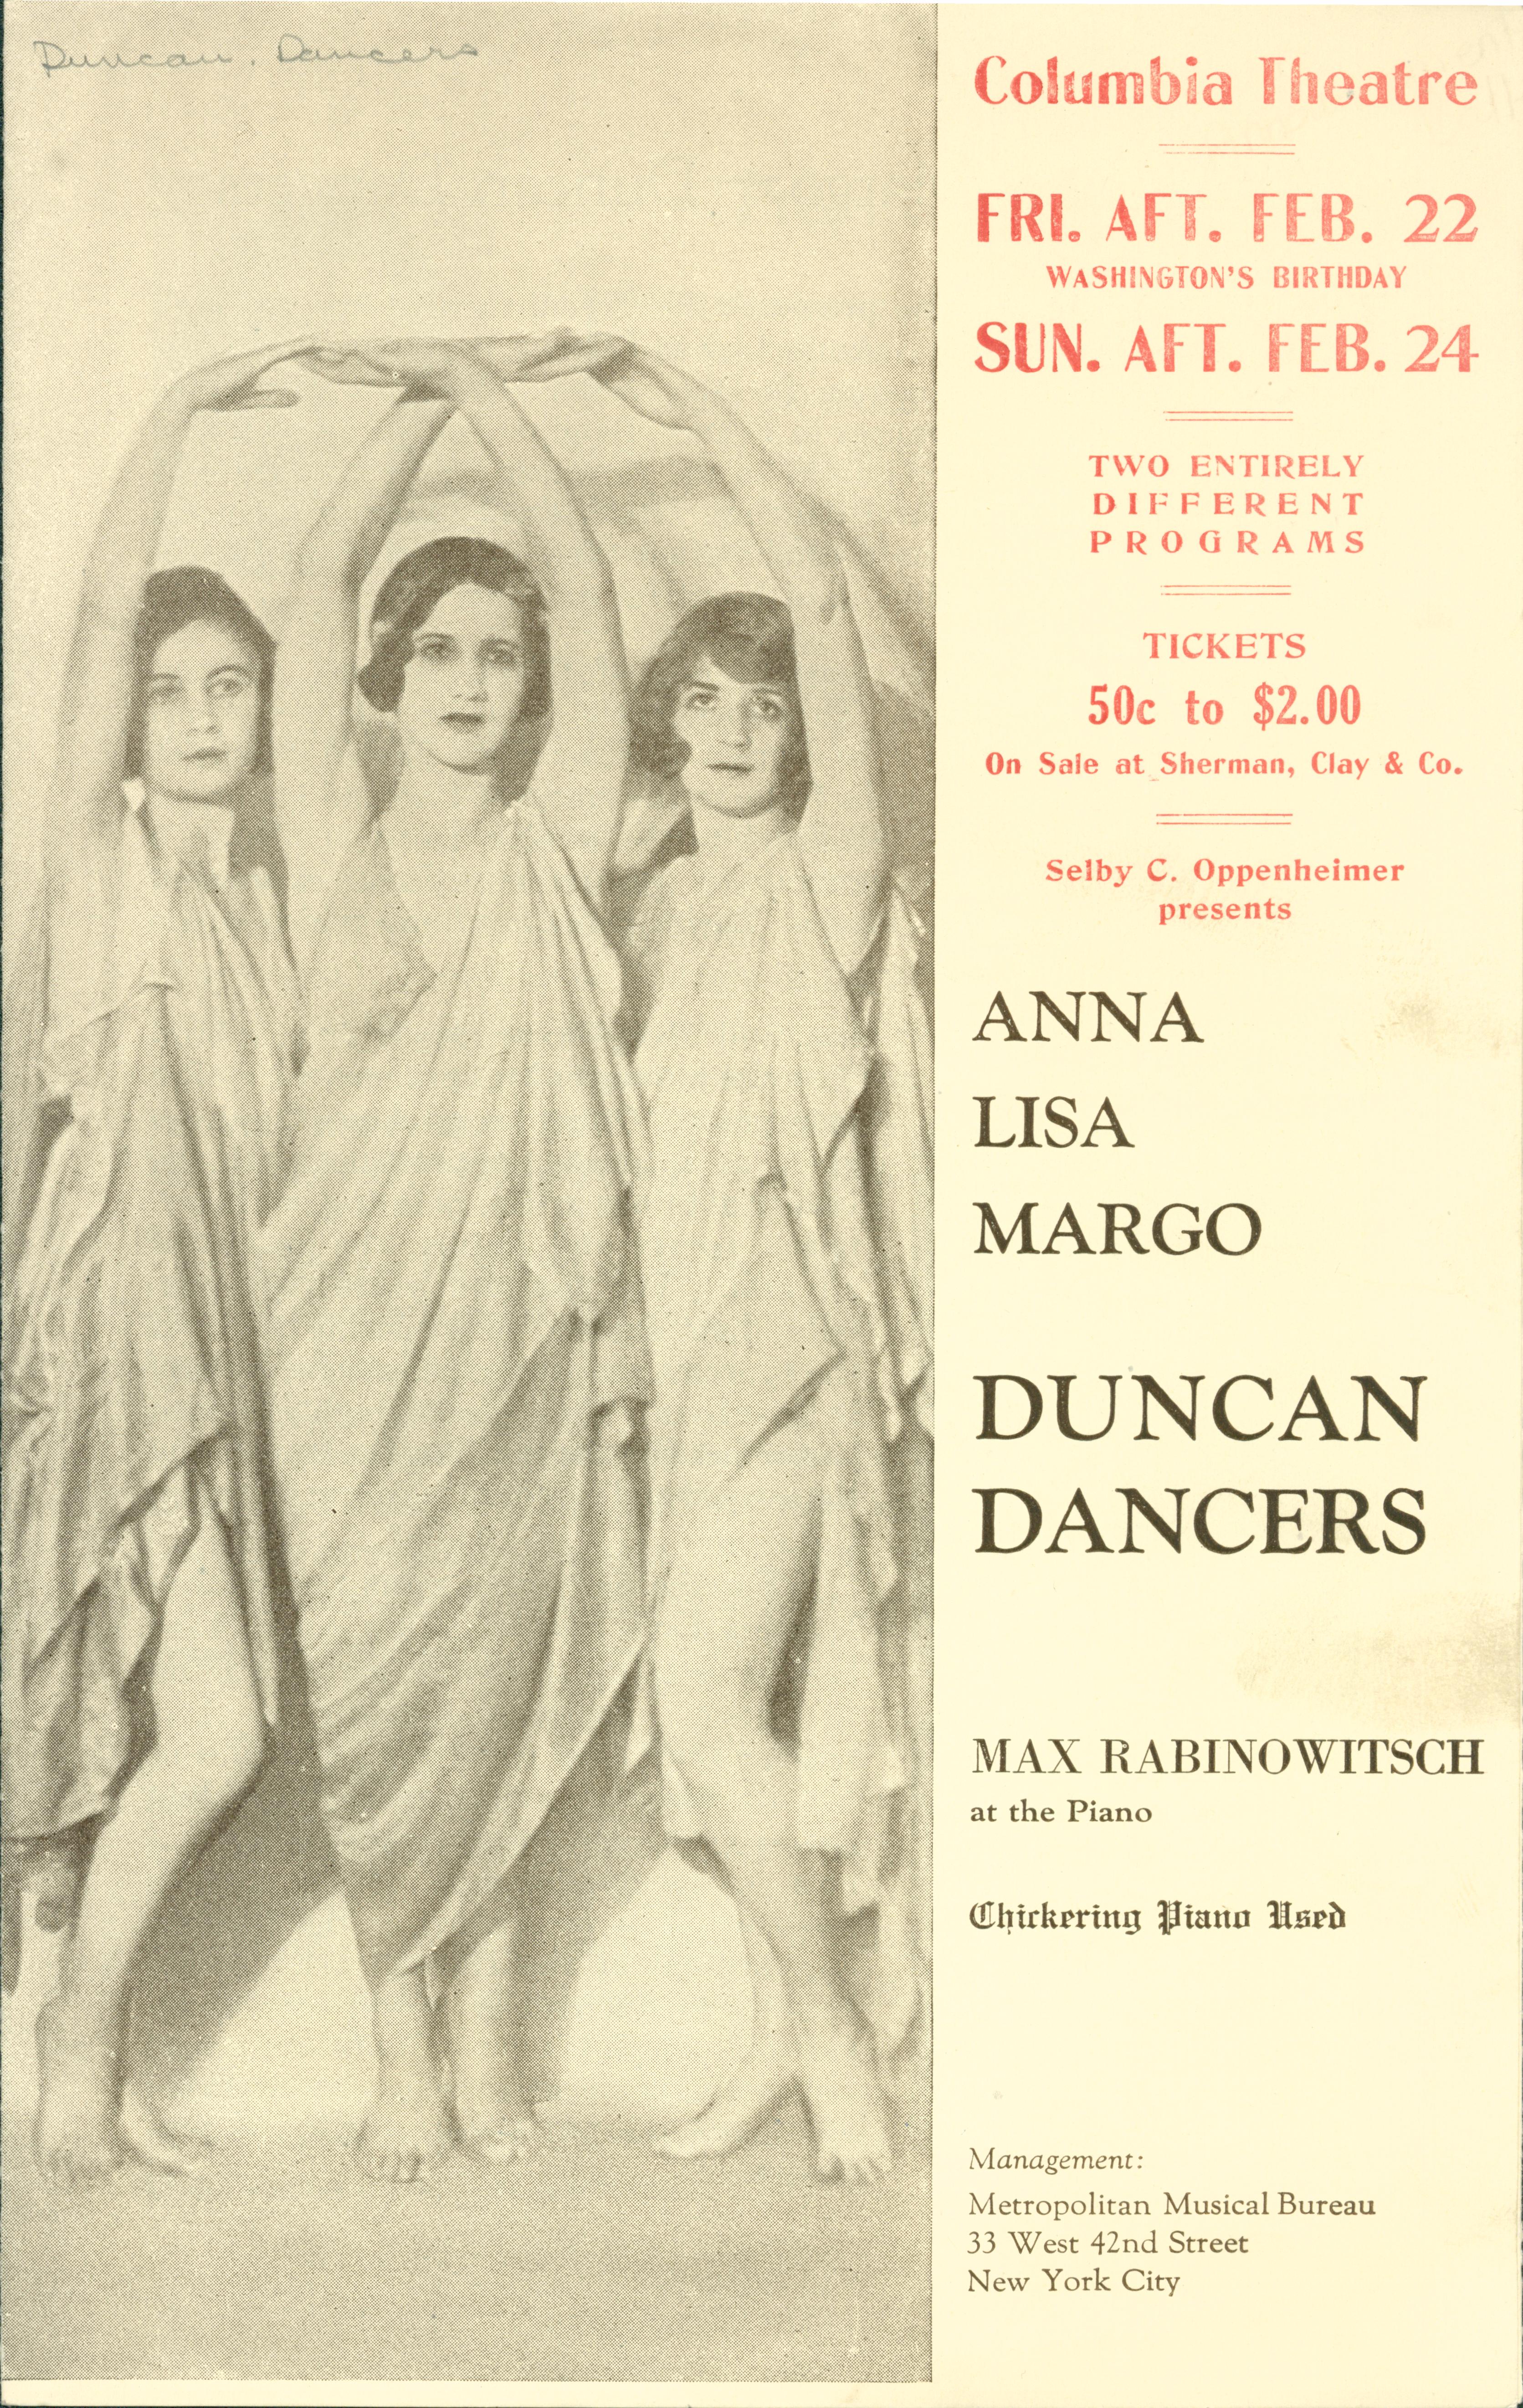 The front of this flier shows three dancers in vaguely grecian dress striking a pose. To the right the program lists the showtimes.